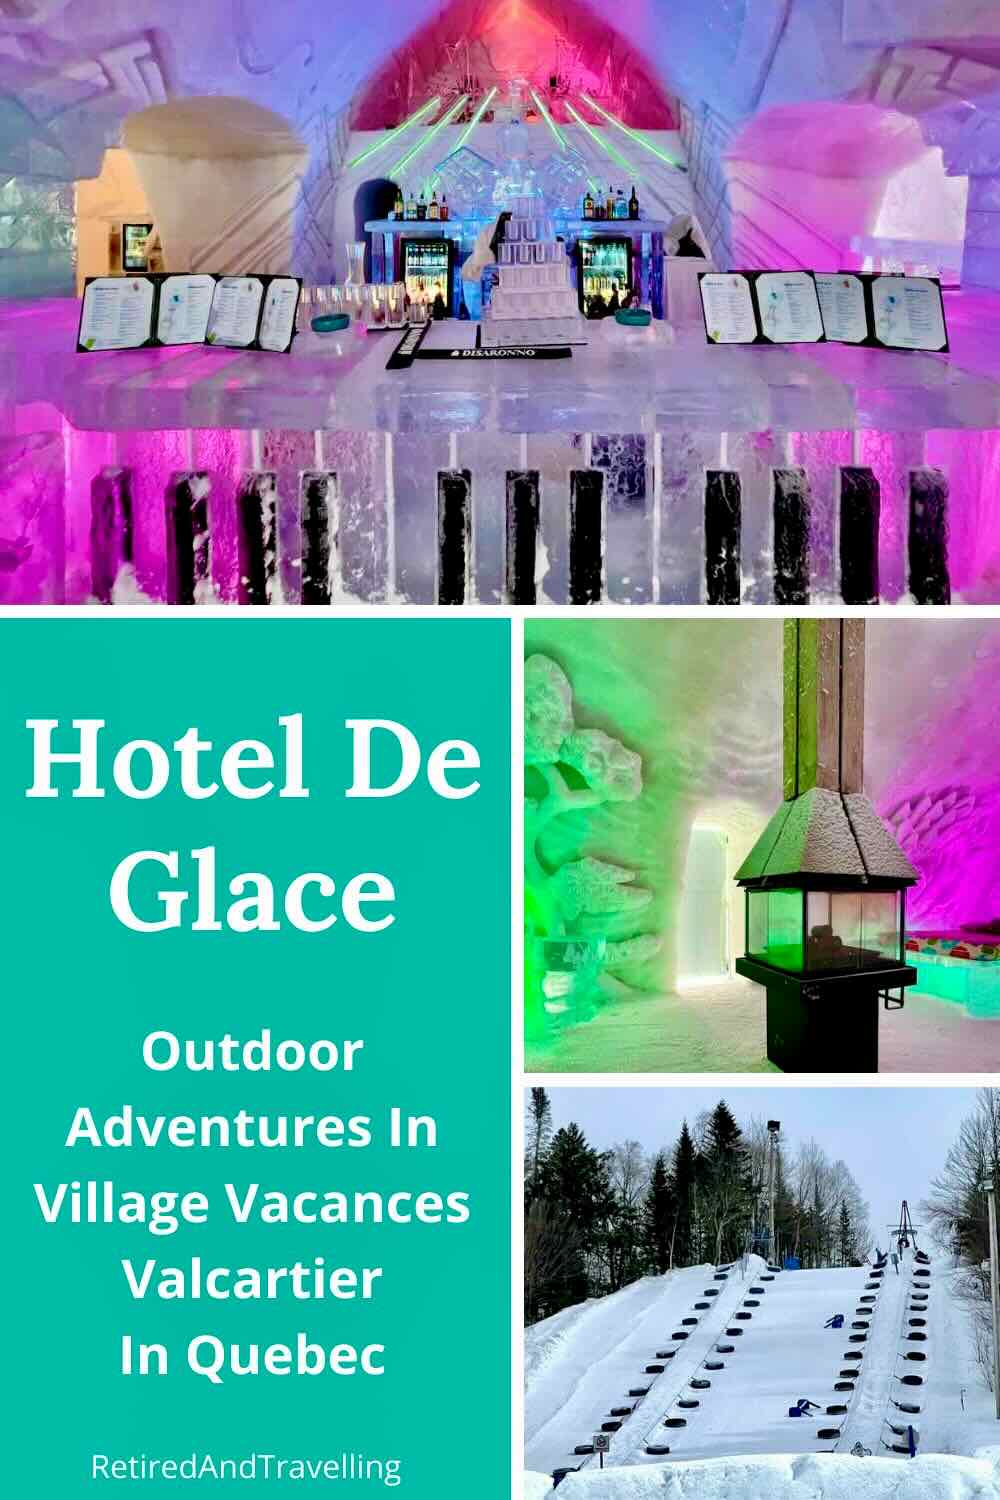 Winter Fun At The Hotel De Glace In Quebec